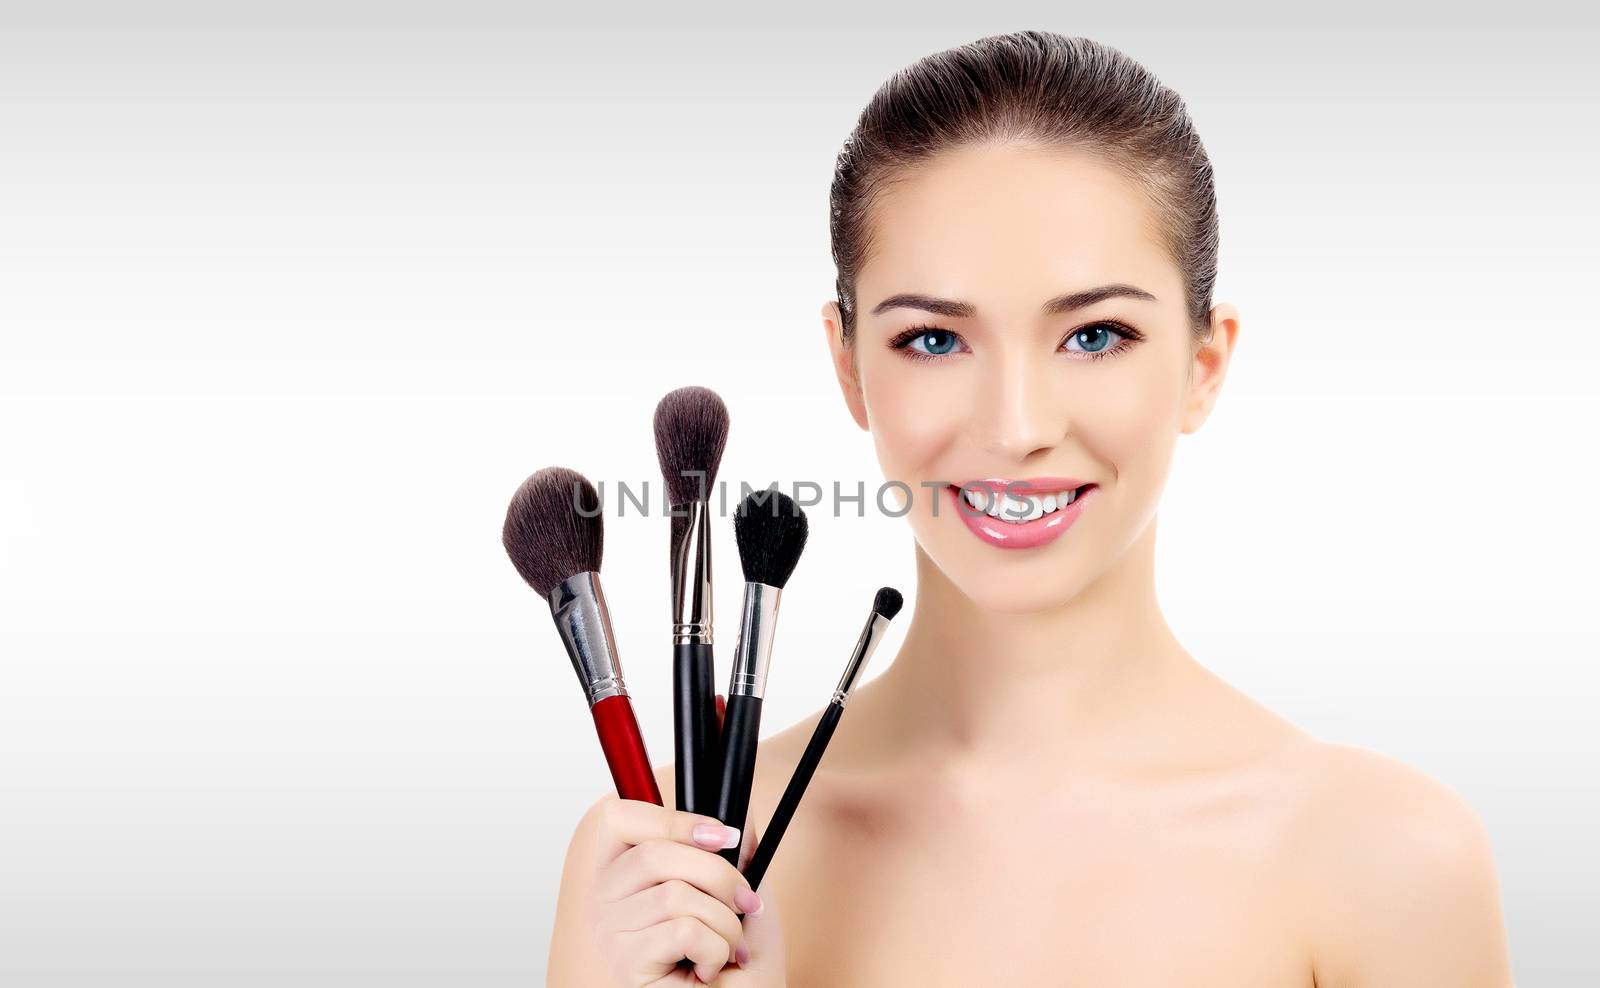 Pretty woman with makeup brushes against a grey background with by Nobilior